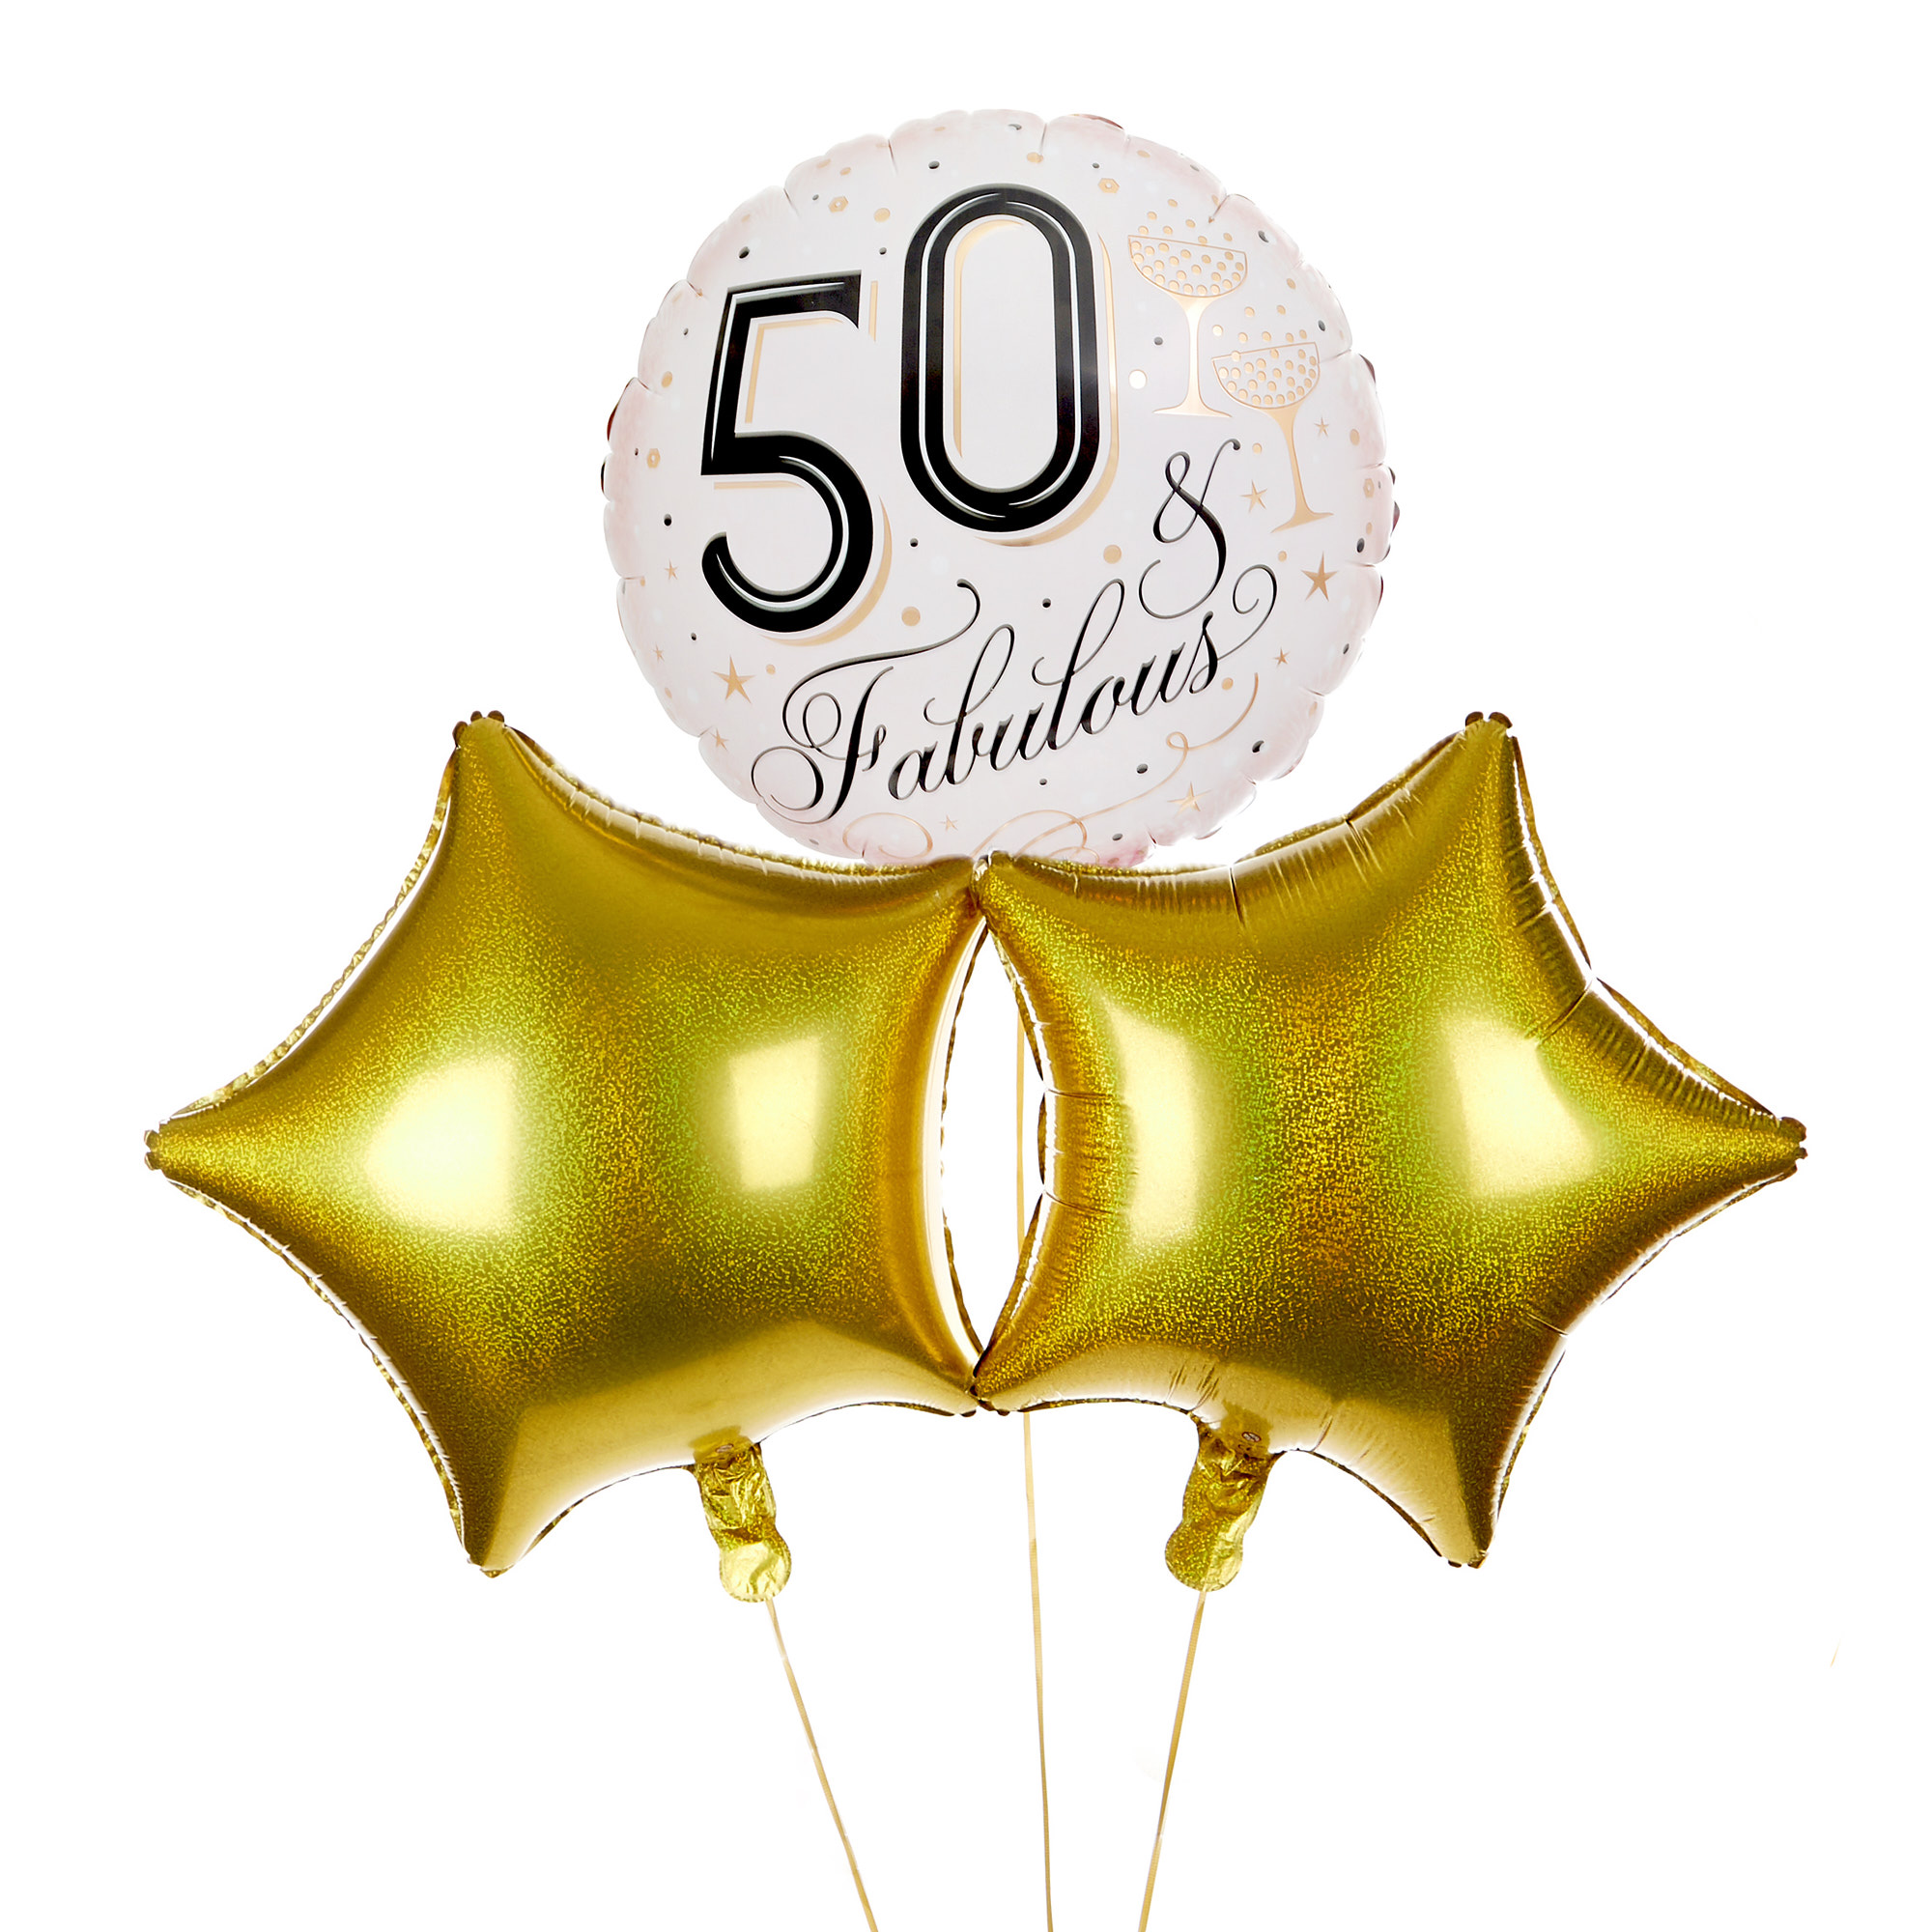 Fabulous 50th Birthday Balloon Bouquet - DELIVERED INFLATED!